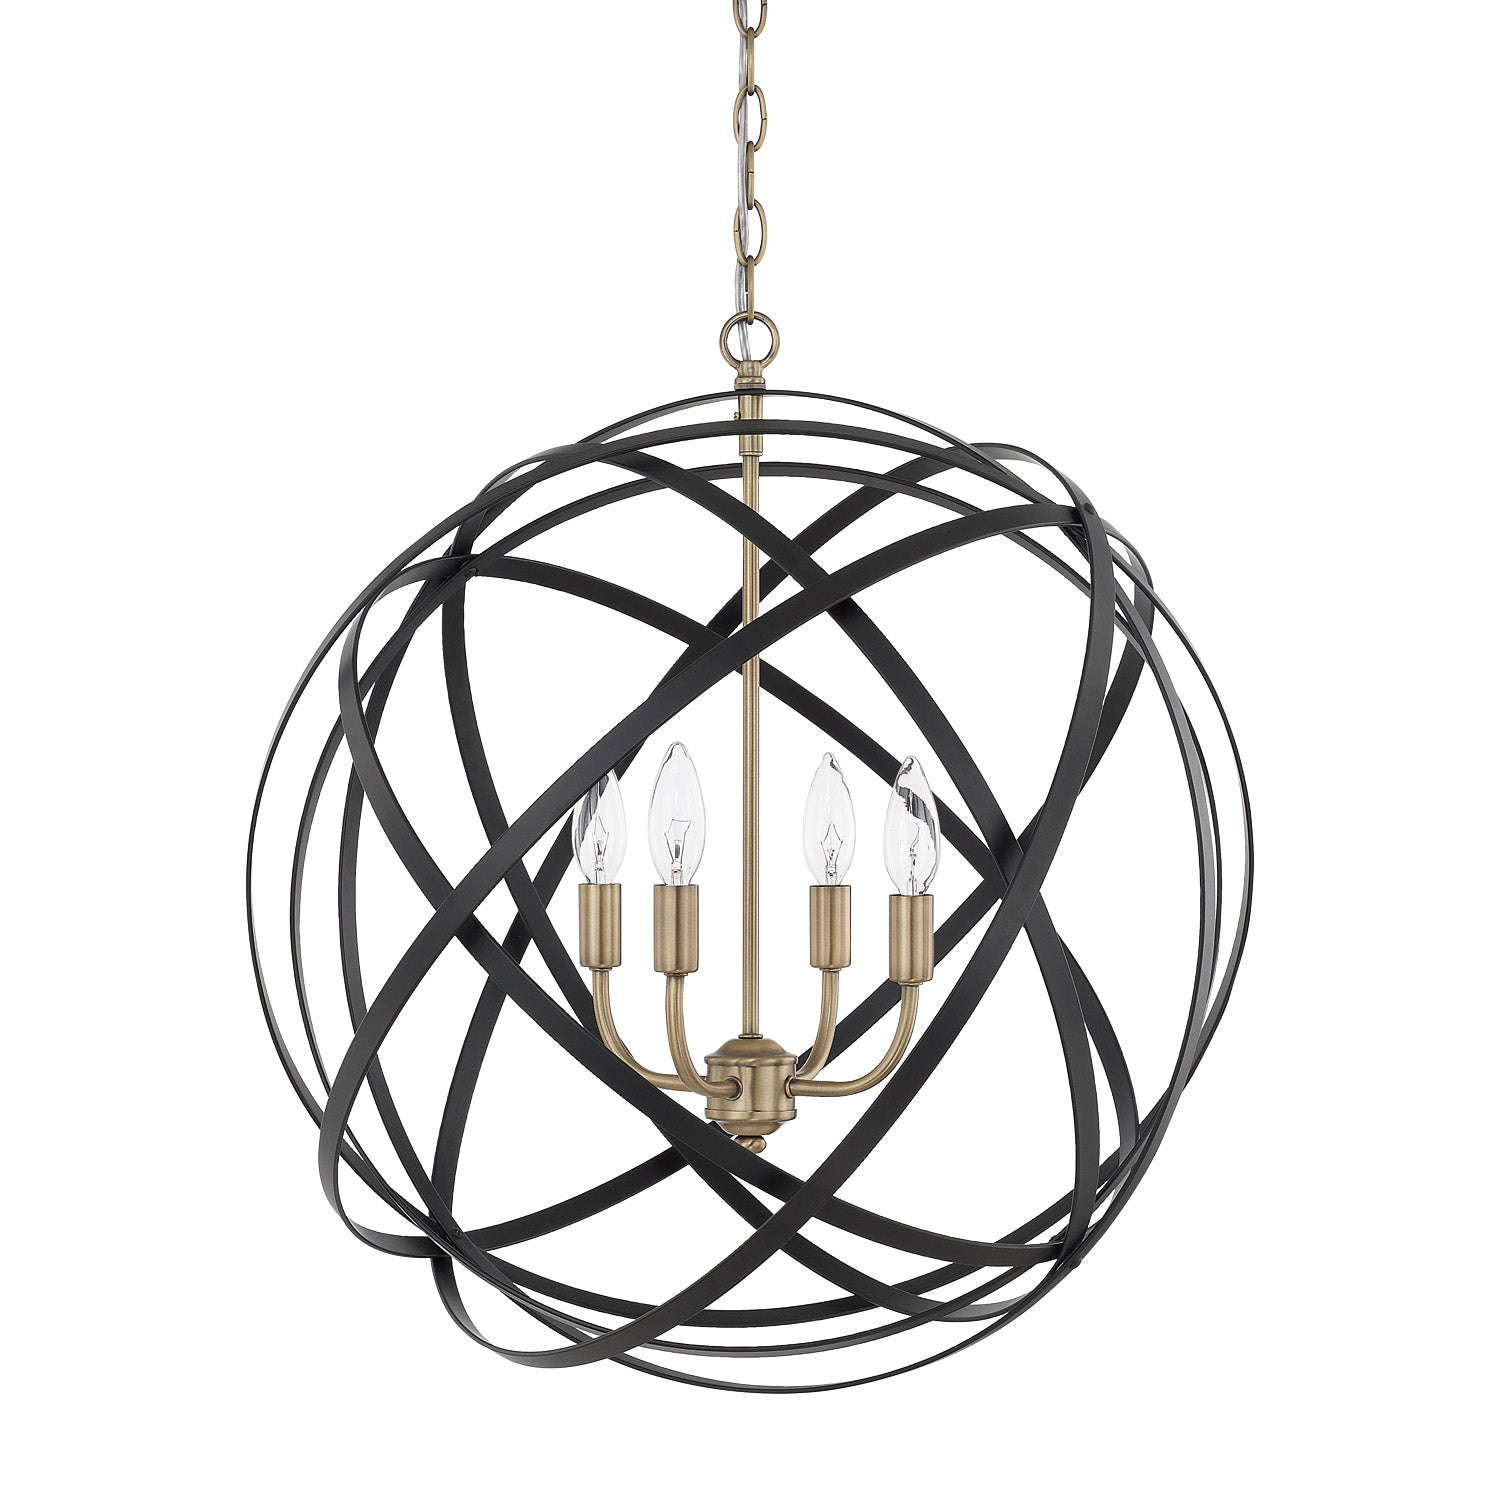 Capital Axis 4234AB Pendant Light - Aged Brass and Black